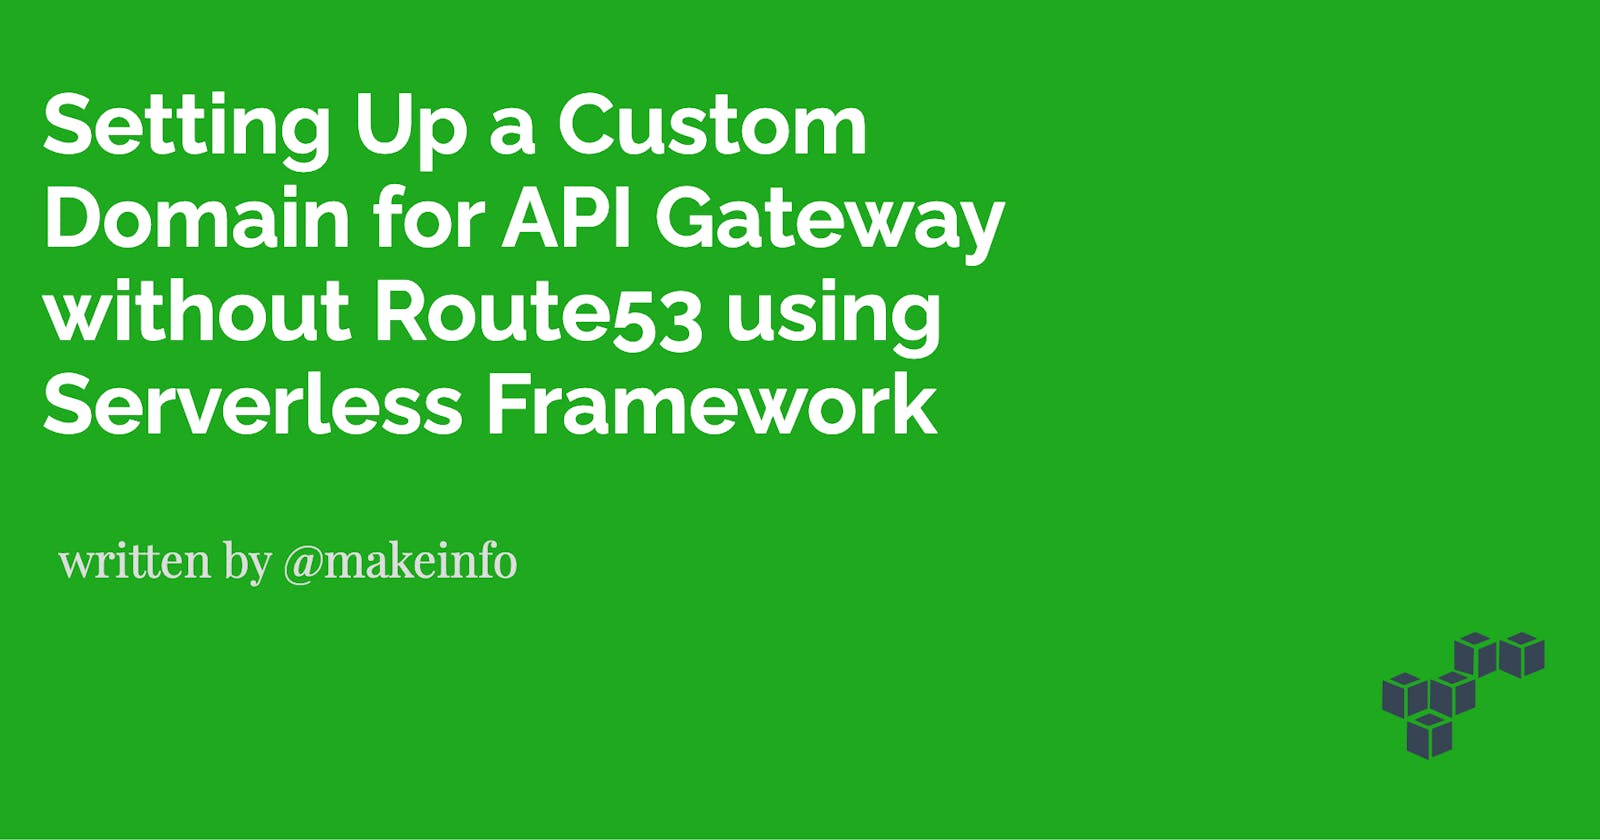 Setting Up a Custom Domain for API Gateway without Route53 using Serverless Framework